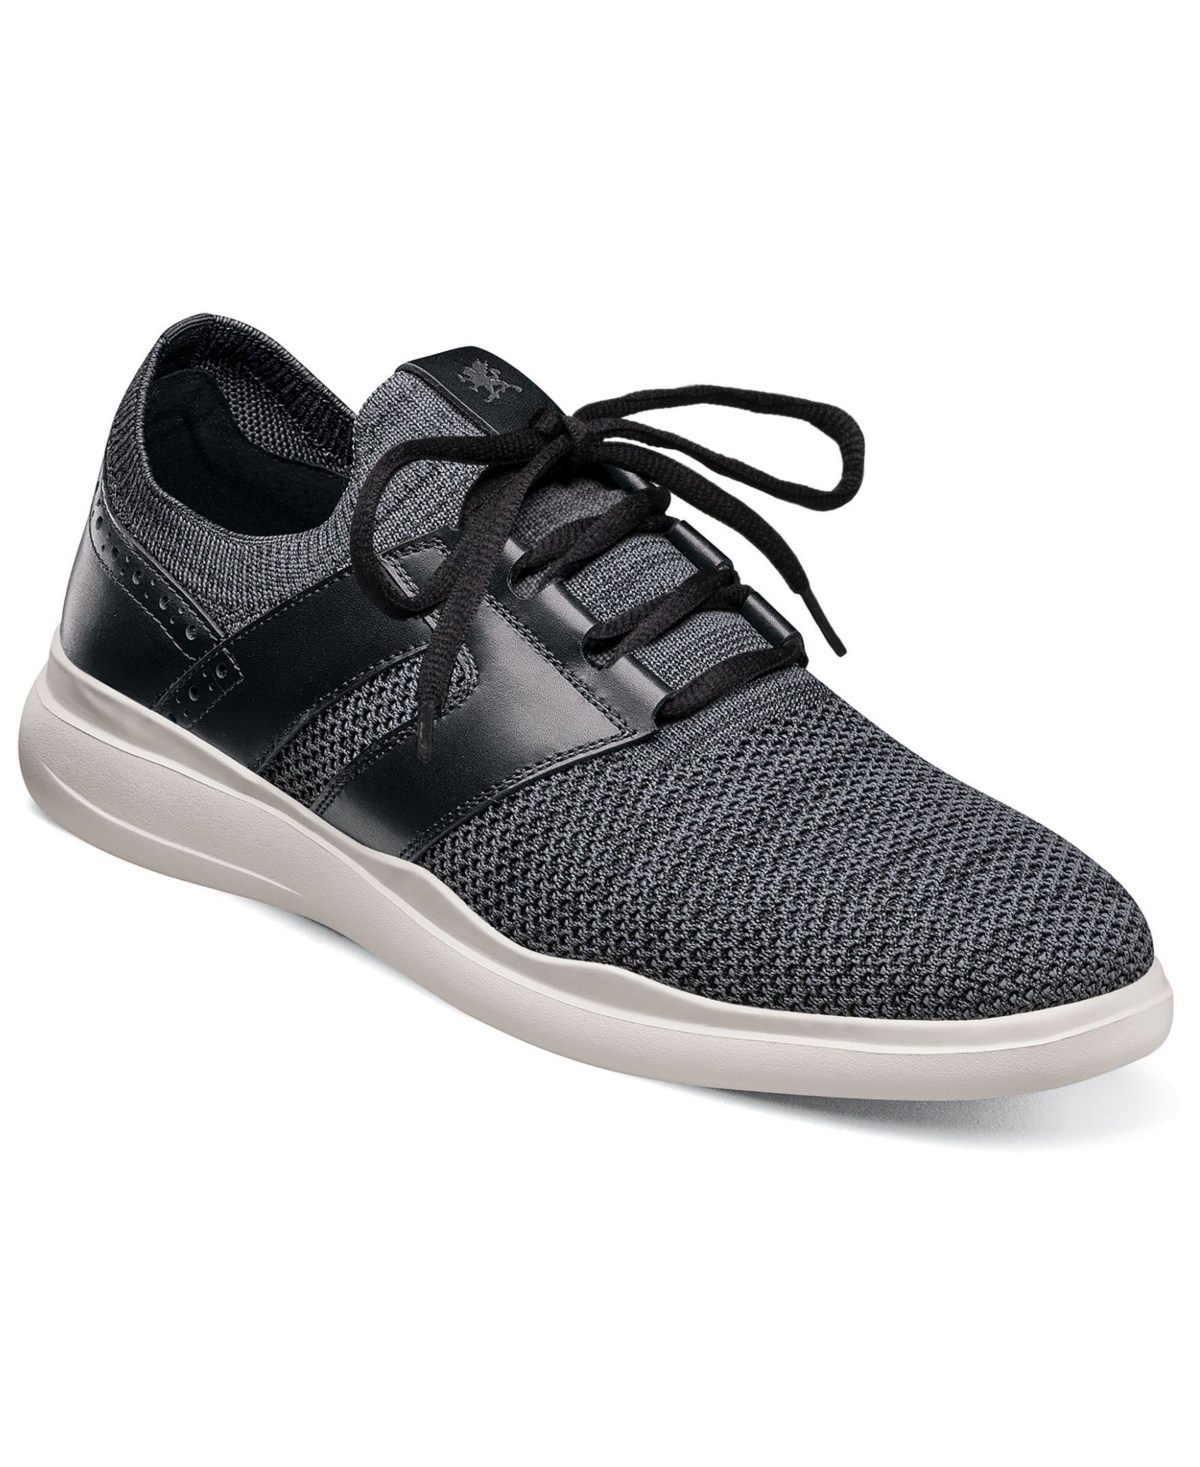 Men's Moxley Knit Plain Toe Lace Shoes - Black and Gray